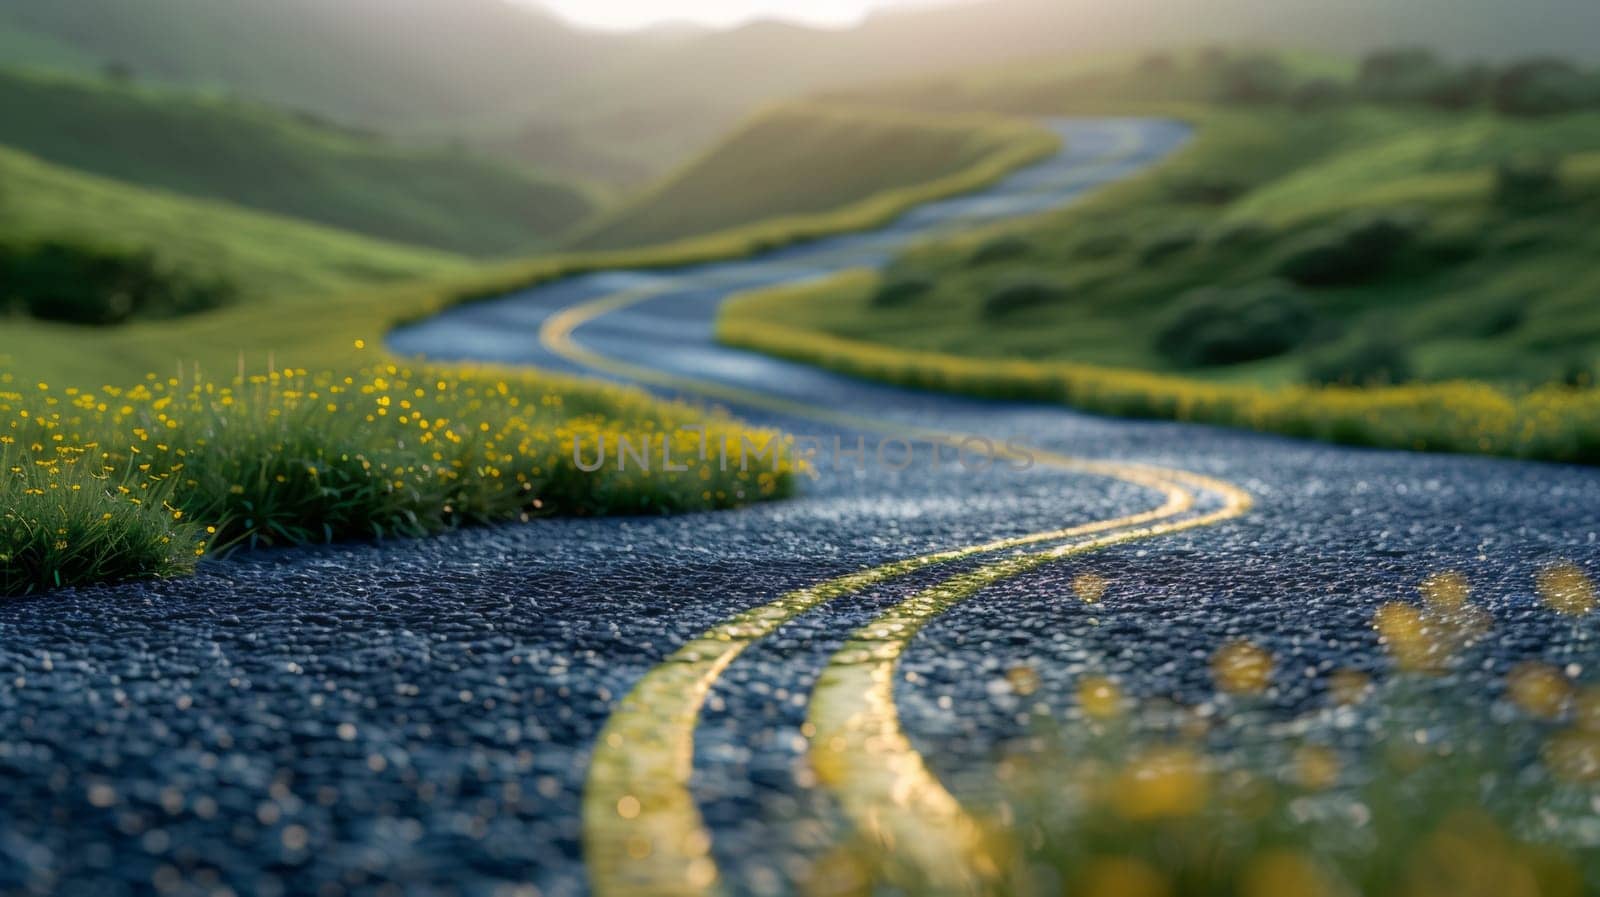 A road with a yellow line painted on it in the middle of grassy hills